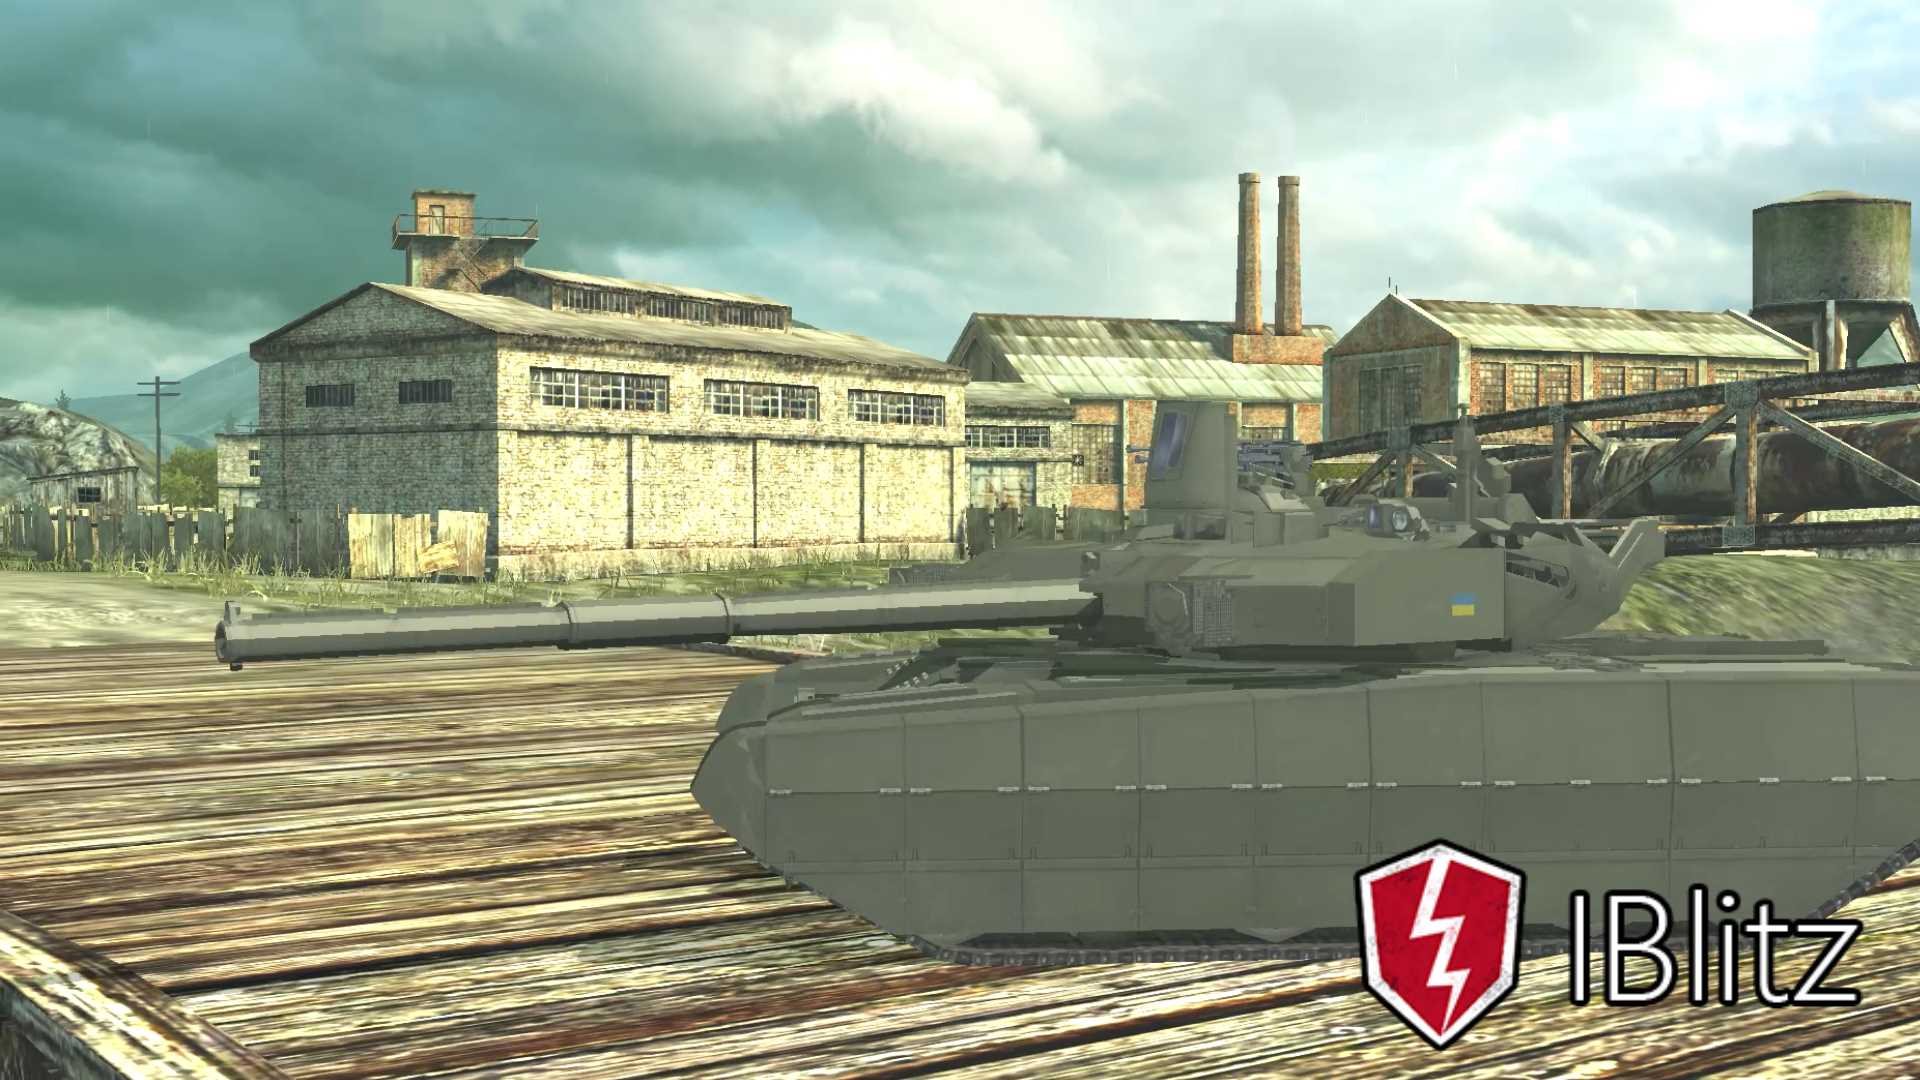 laser pointers mod for world of tanks blitz download